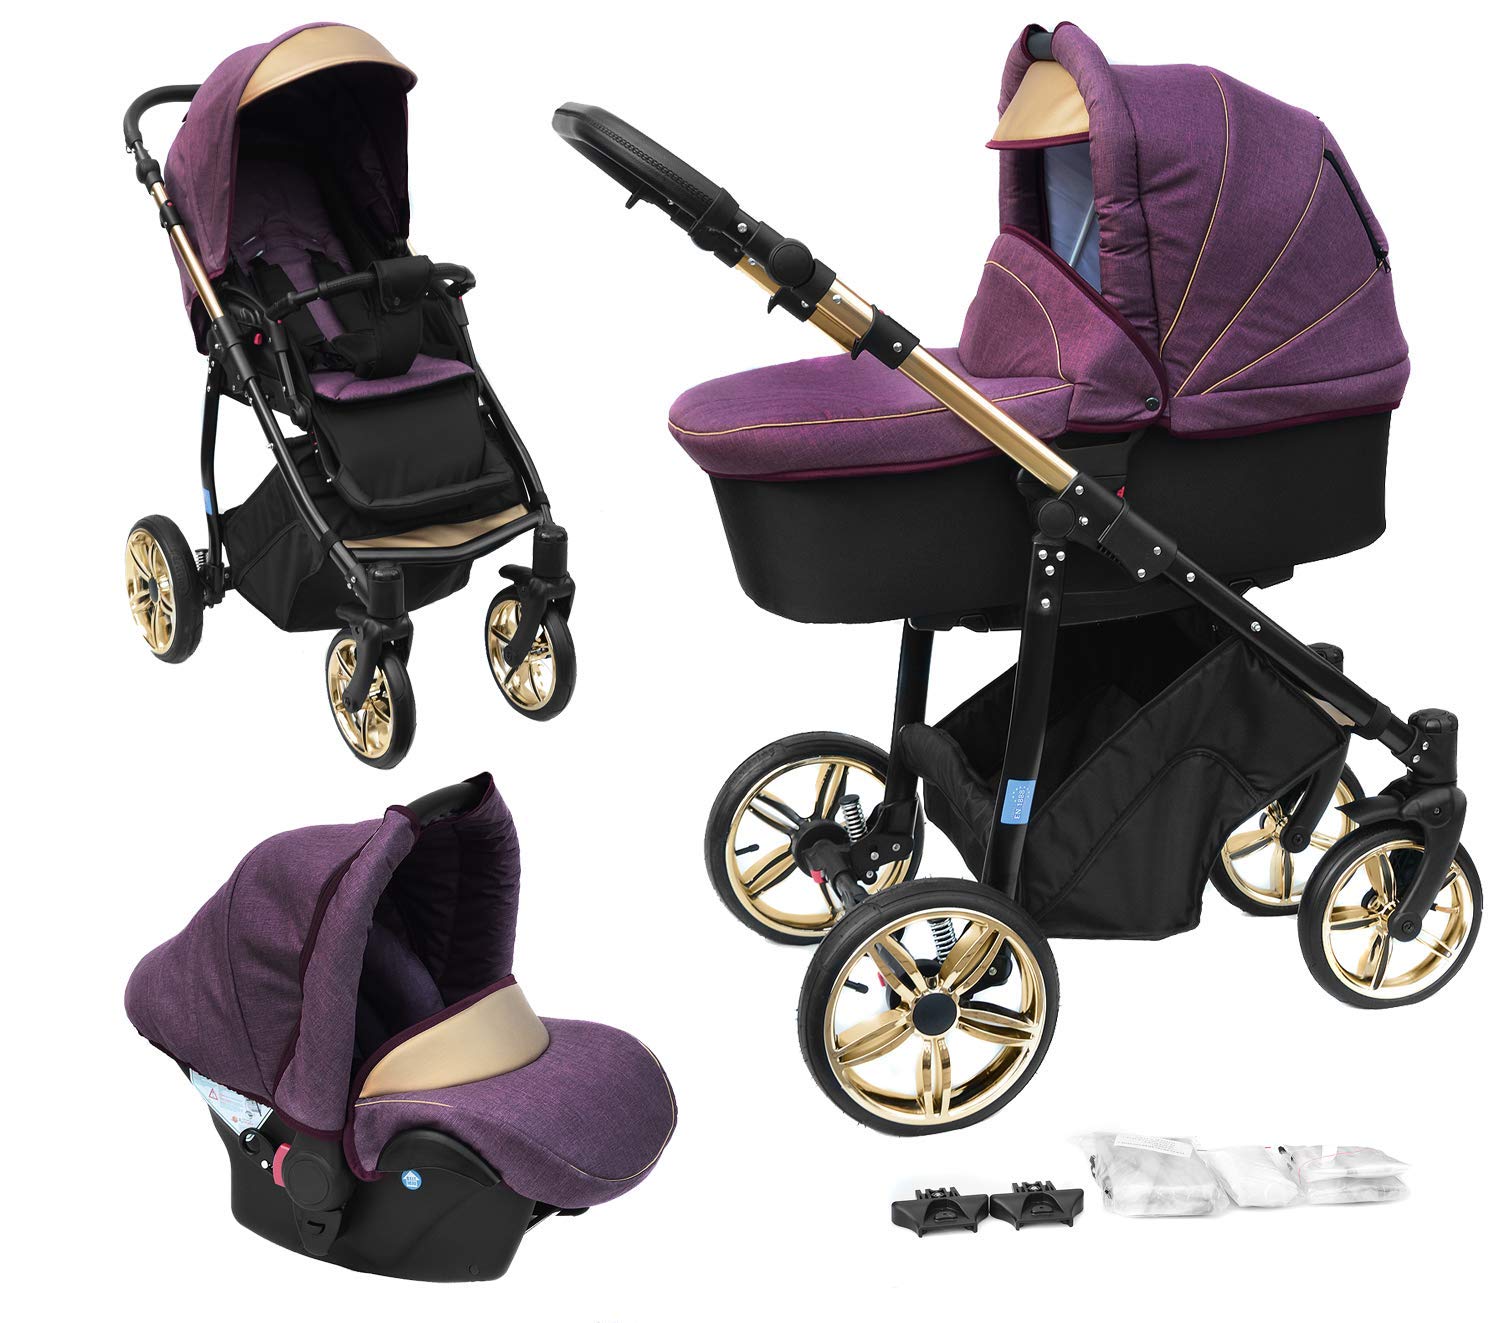 Skyline 3-in-1 Combination Pram with Aluminium Frame, Baby Cot, Sports Buggy Attachment and Baby Car Seat (ISOFIX)